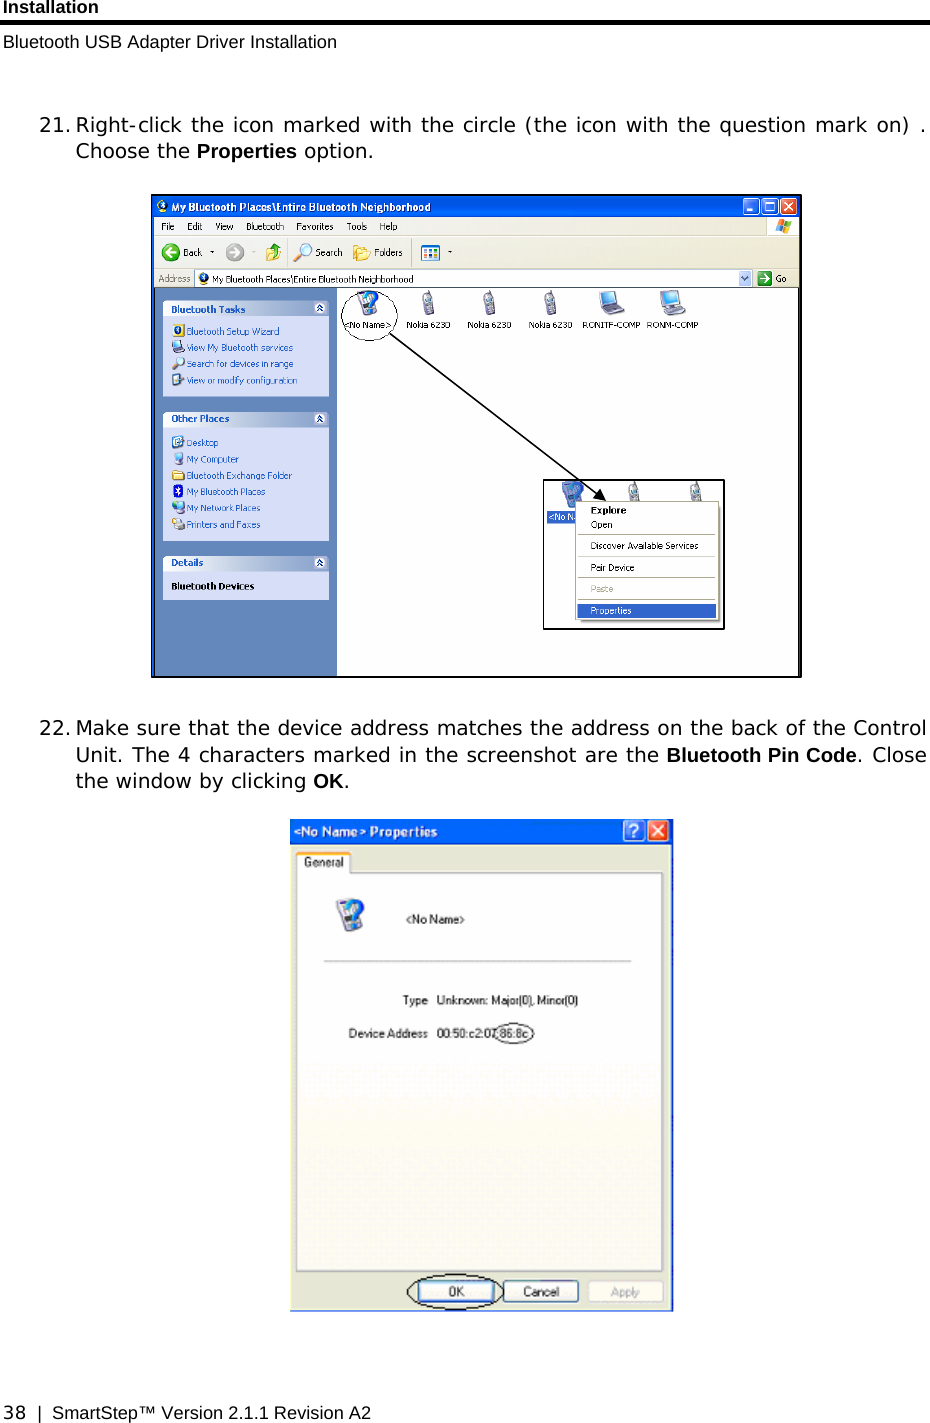 Installation Bluetooth USB Adapter Driver Installation  38  |  SmartStep™ Version 2.1.1 Revision A2  21. Right-click the icon marked with the circle (the icon with the question mark on) . Choose the Properties option.    22. Make sure that the device address matches the address on the back of the Control Unit. The 4 characters marked in the screenshot are the Bluetooth Pin Code. Close the window by clicking OK.     